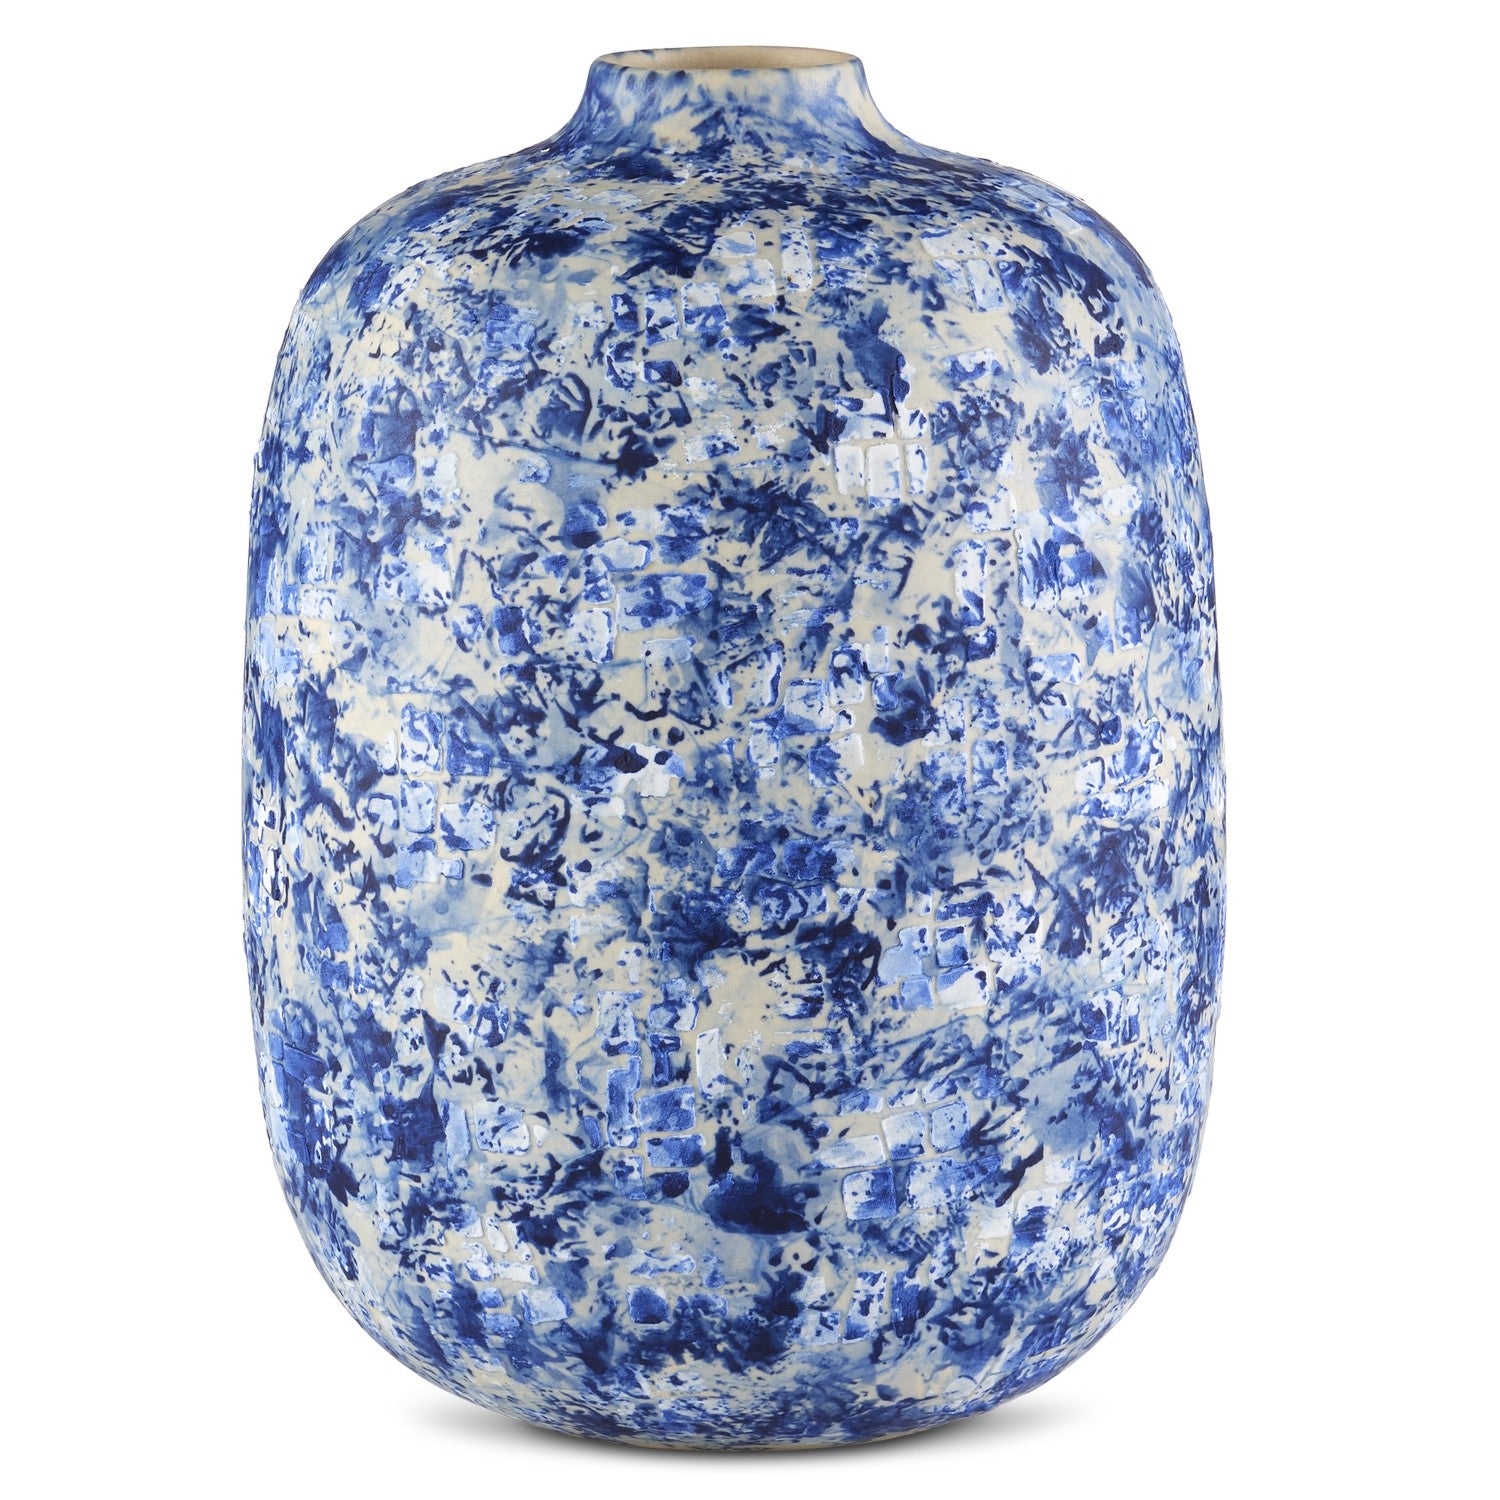 Currey and Company - 1200-0749 - Vase - Blue/White